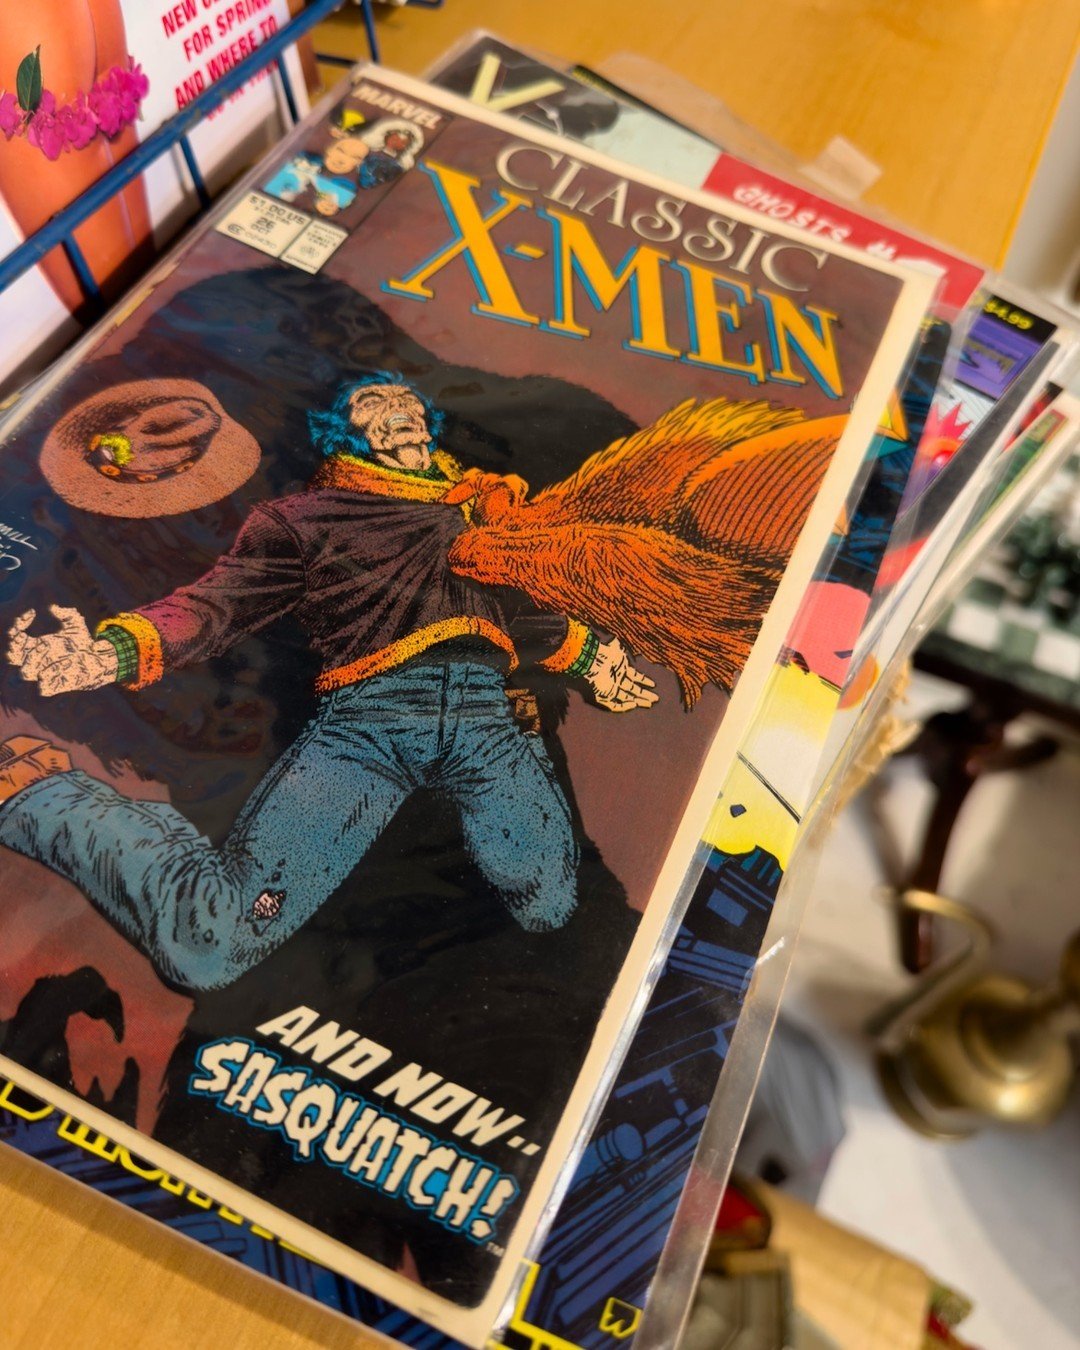 Calling all #ComicBookCollectors! 📢 You never know what #collectibles you&rsquo;ll find at #PasadenaAntiqueCenter &amp; Annex. ⠀
⠀
Come by every day between 10am-6pm to browse what&rsquo;s new! ⠀
⠀
#FoundItAtPAC #ComicBook #XMen